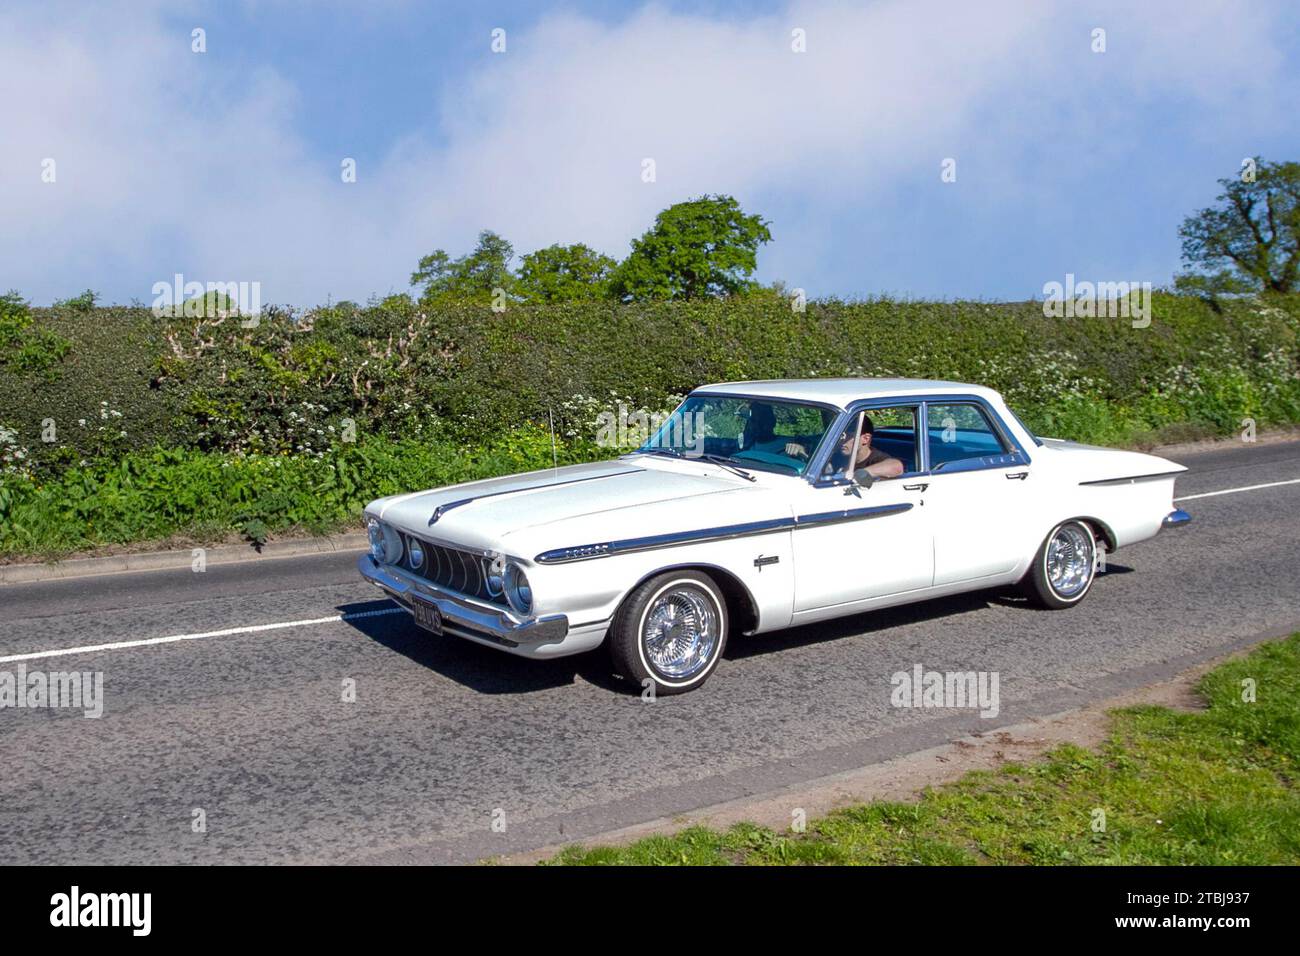 1961 60s sixties American White Chrysler Plymouth Sport Fury 383, four-door sedan with tail fins removed: Vintage, restored classic motors, automobile collectors motoring enthusiasts, historic veteran cars travelling in Cheshire, UK Stock Photo